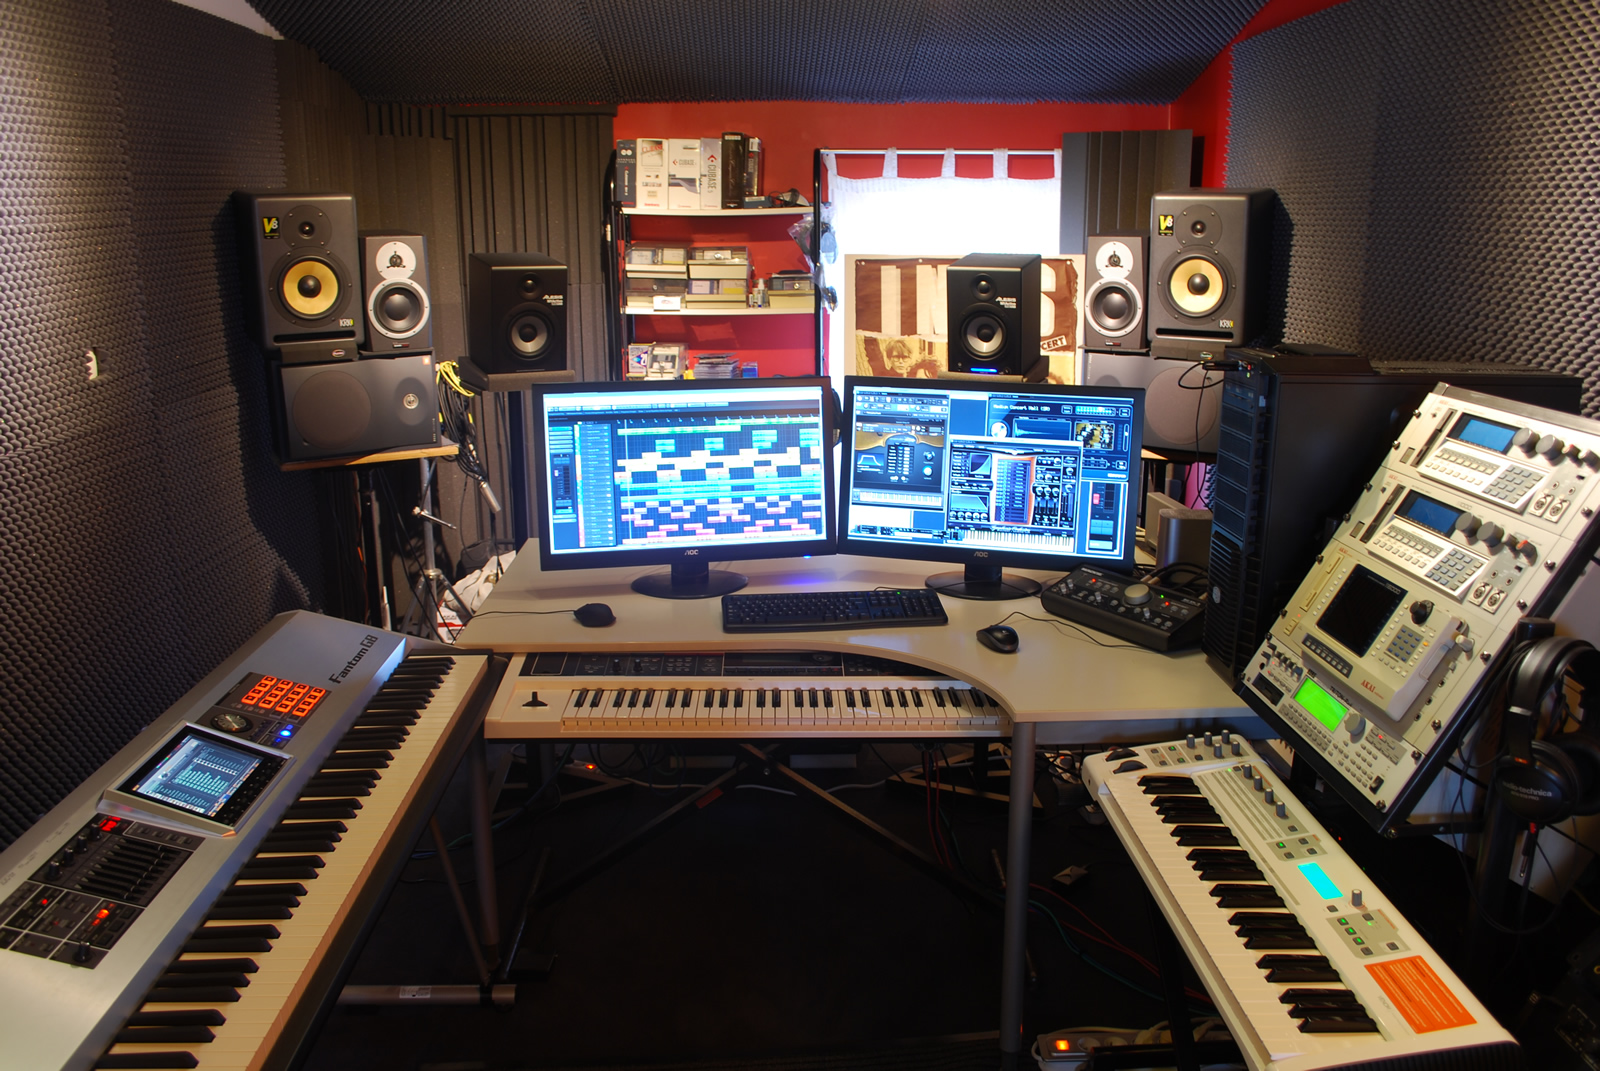 3 Myths That Most Music Producers Believe Are True - Mixed In Key Community
